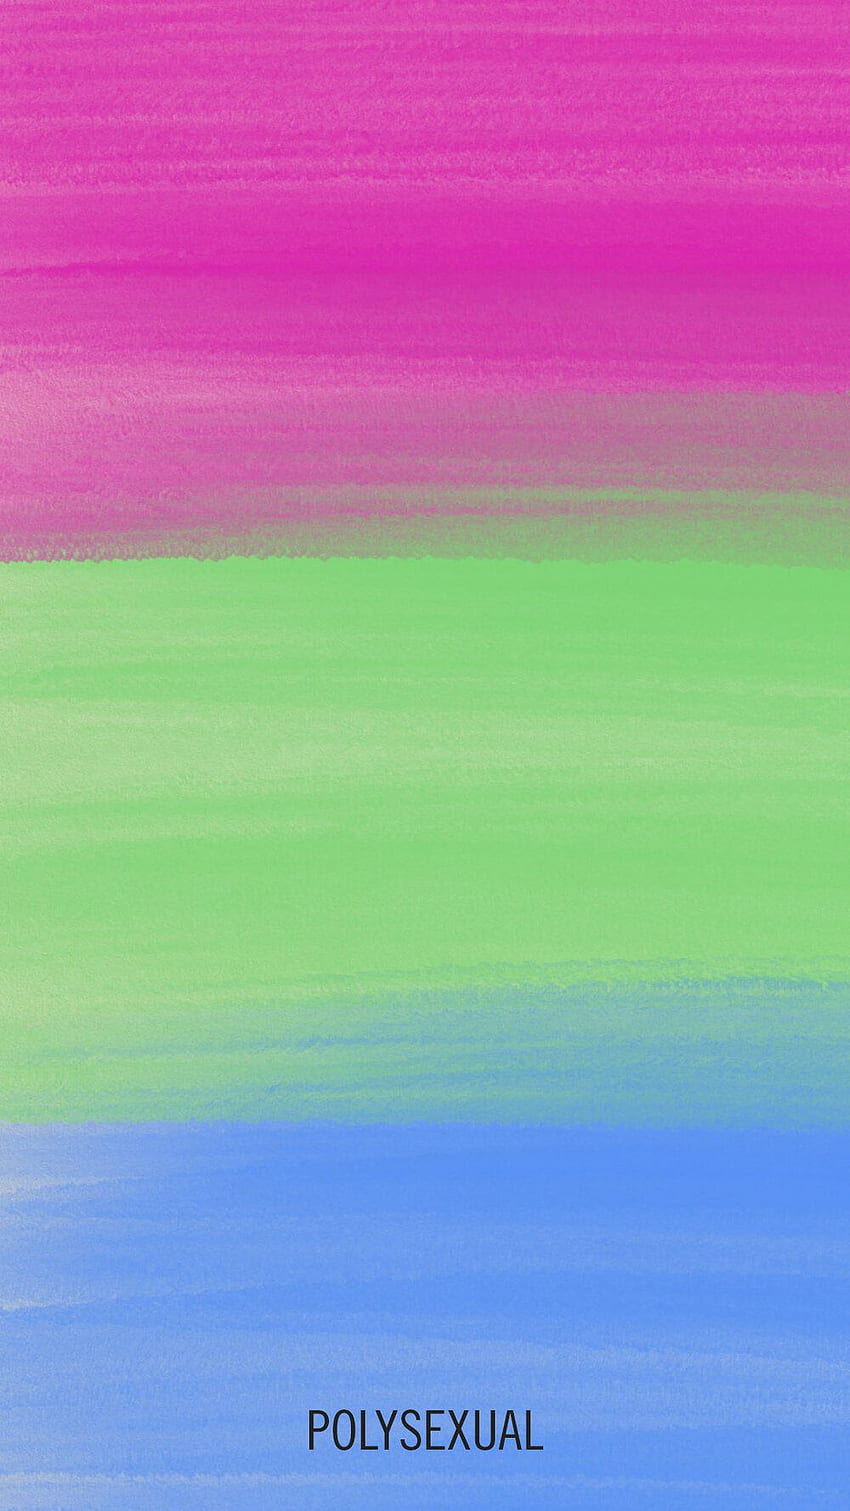 I made some aesthetic polysexual wallpapers  rPolysexual